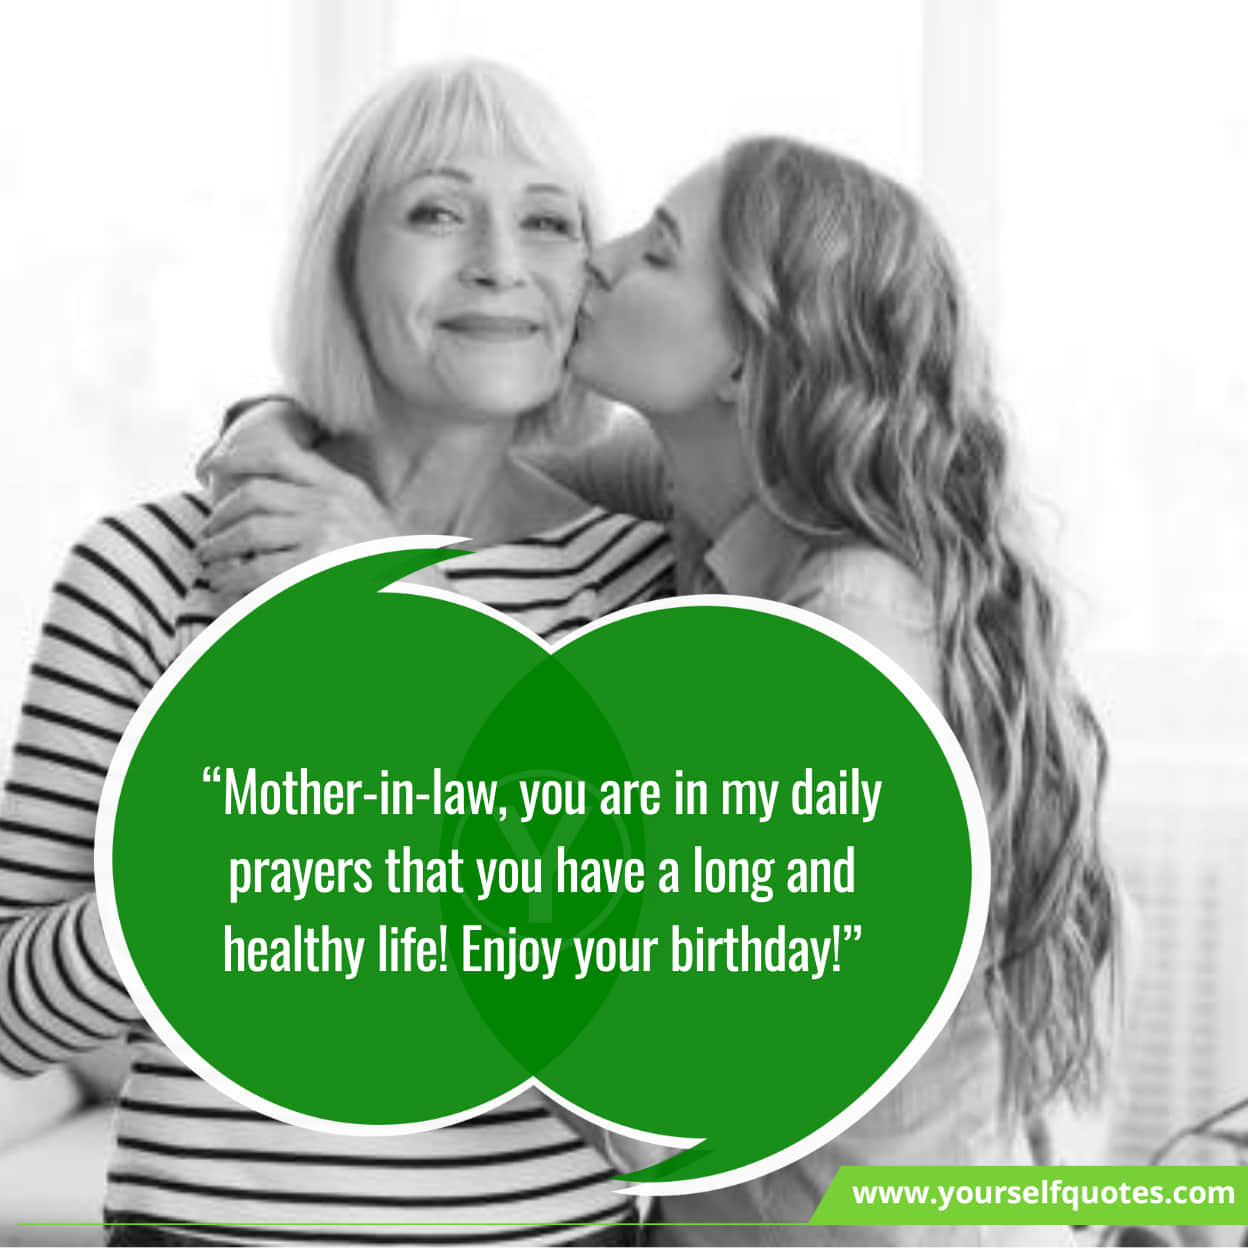 Best Unique Birthday Wishes for Mother in law